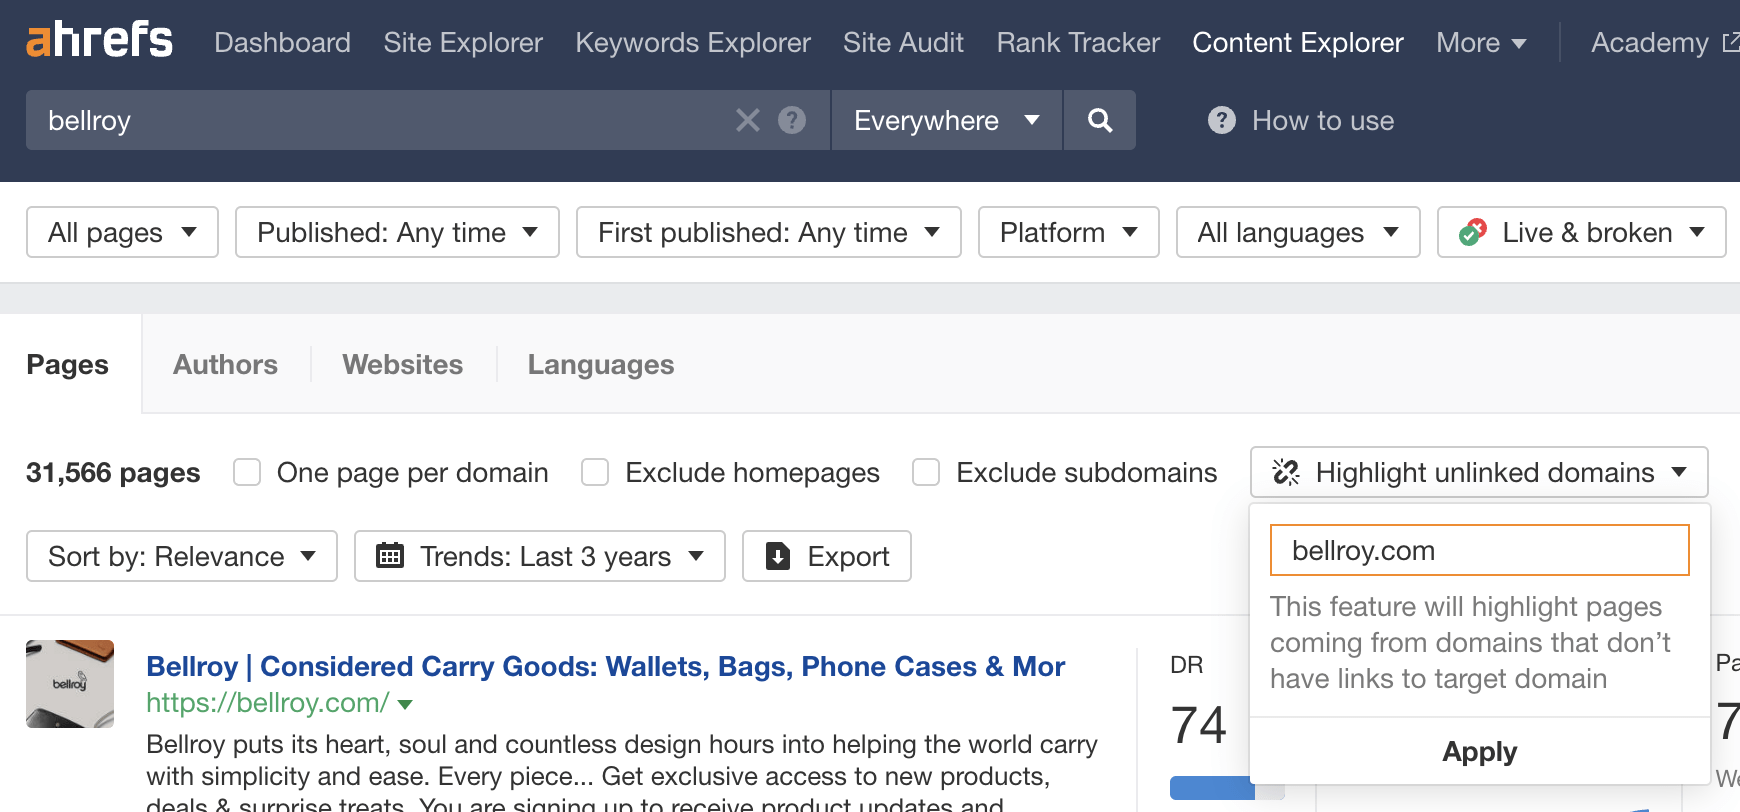 Finding unlinked mentions for Bellroy in Content Explorer
